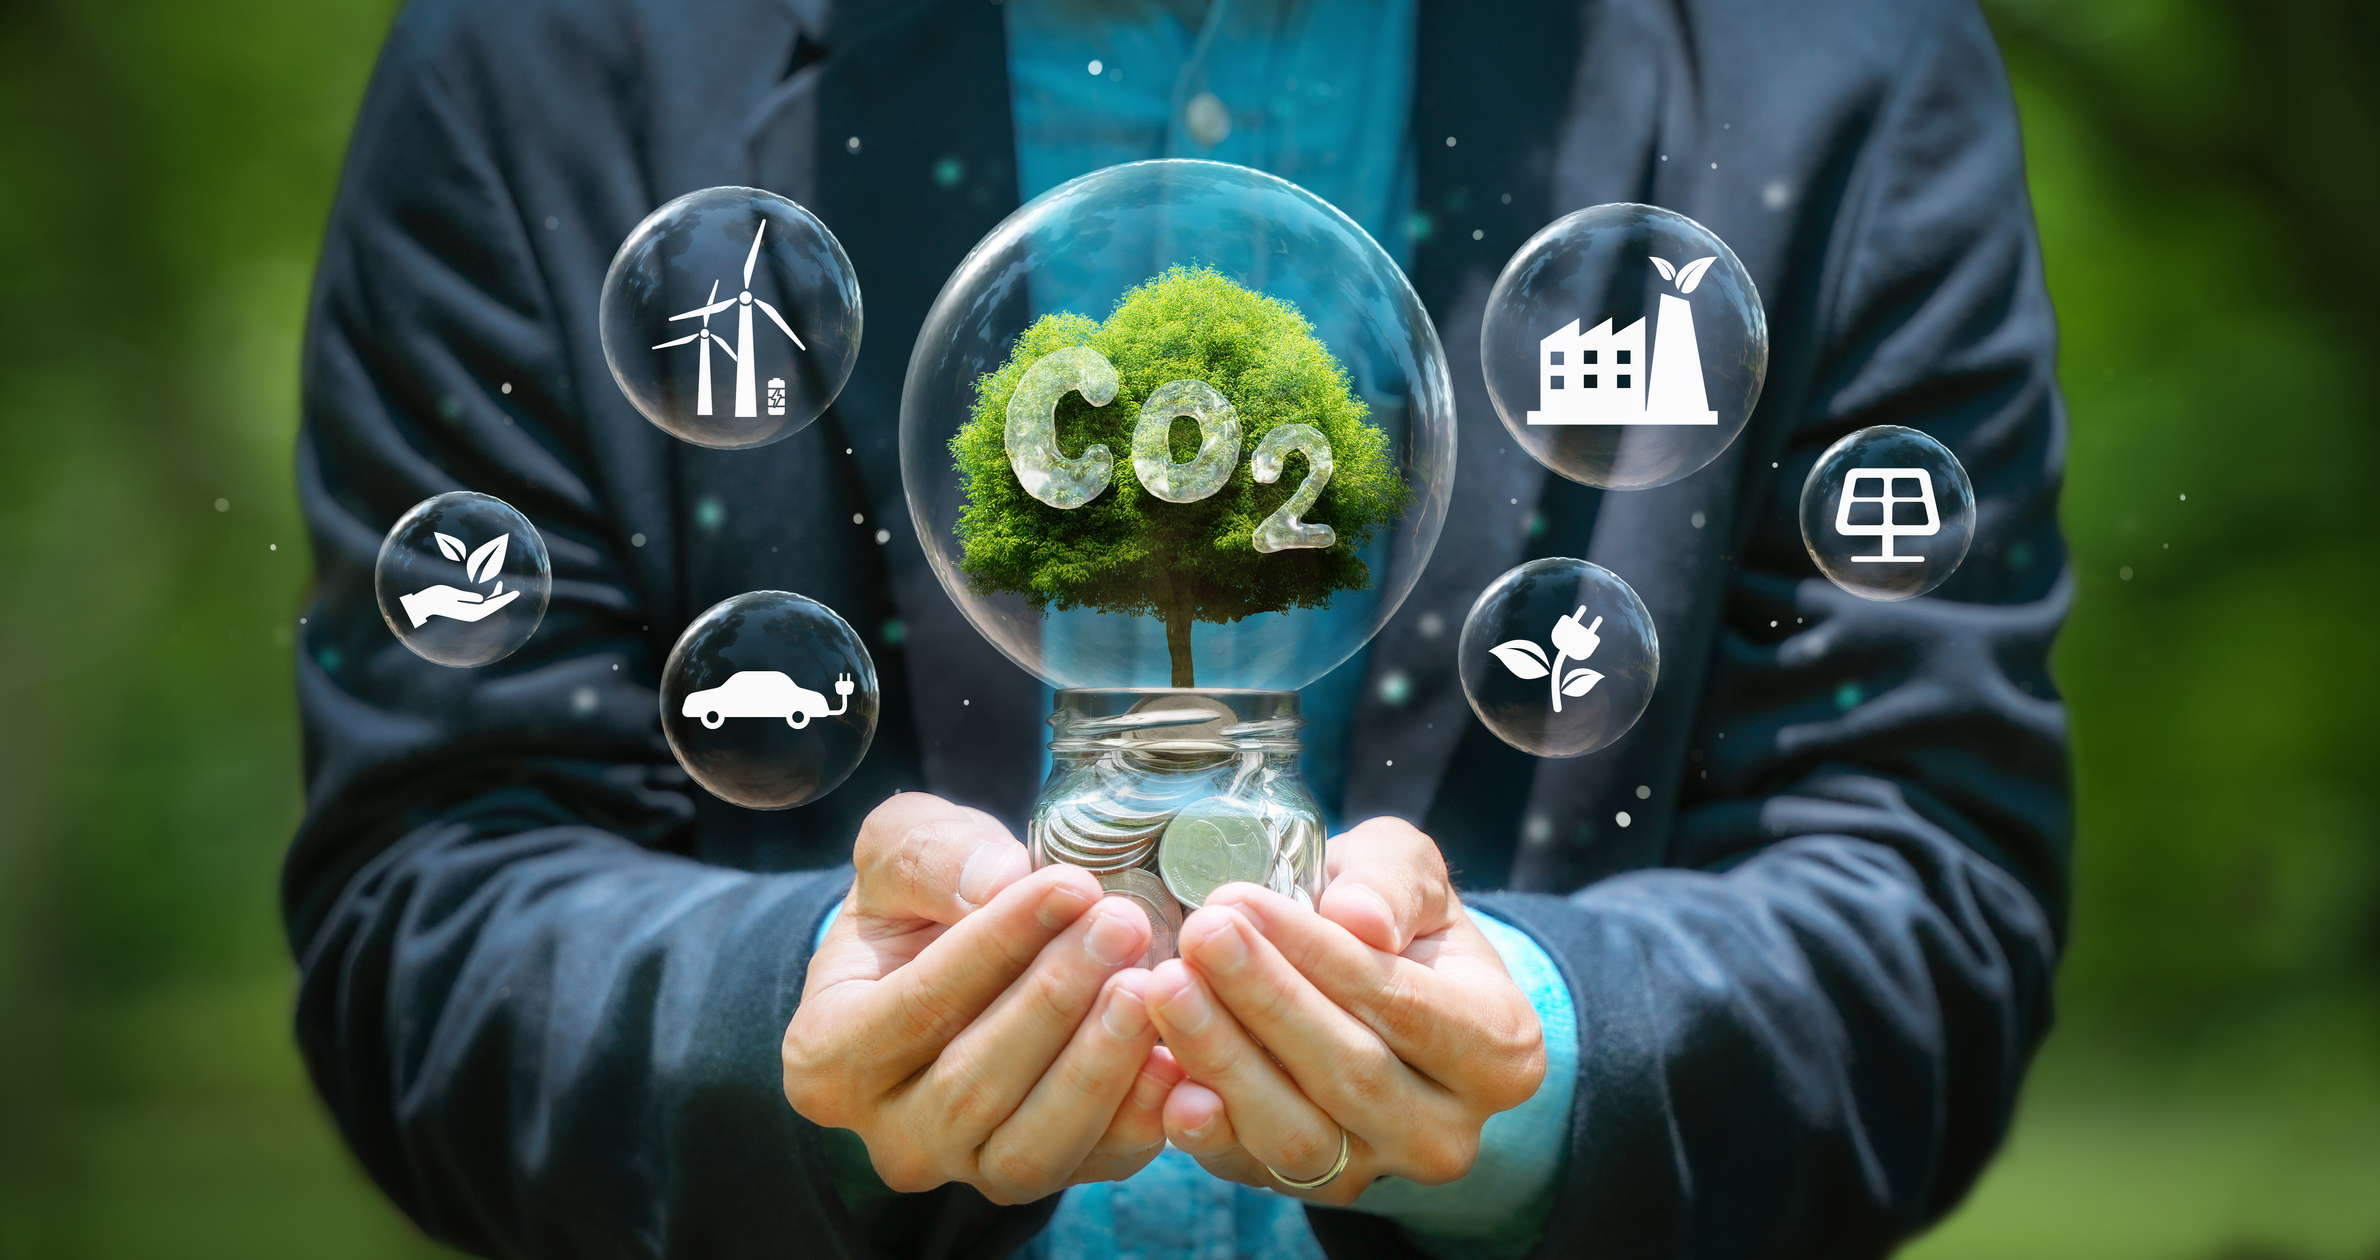 Conceptual image of a person holding a lightbulb with a green tree inside, symbolizing eco-friendly energy, surrounded by bubbles containing icons for wind power, electric vehicle, sustainable industry, and solar panels, representing the integration of carbon management and renewable energy solutions